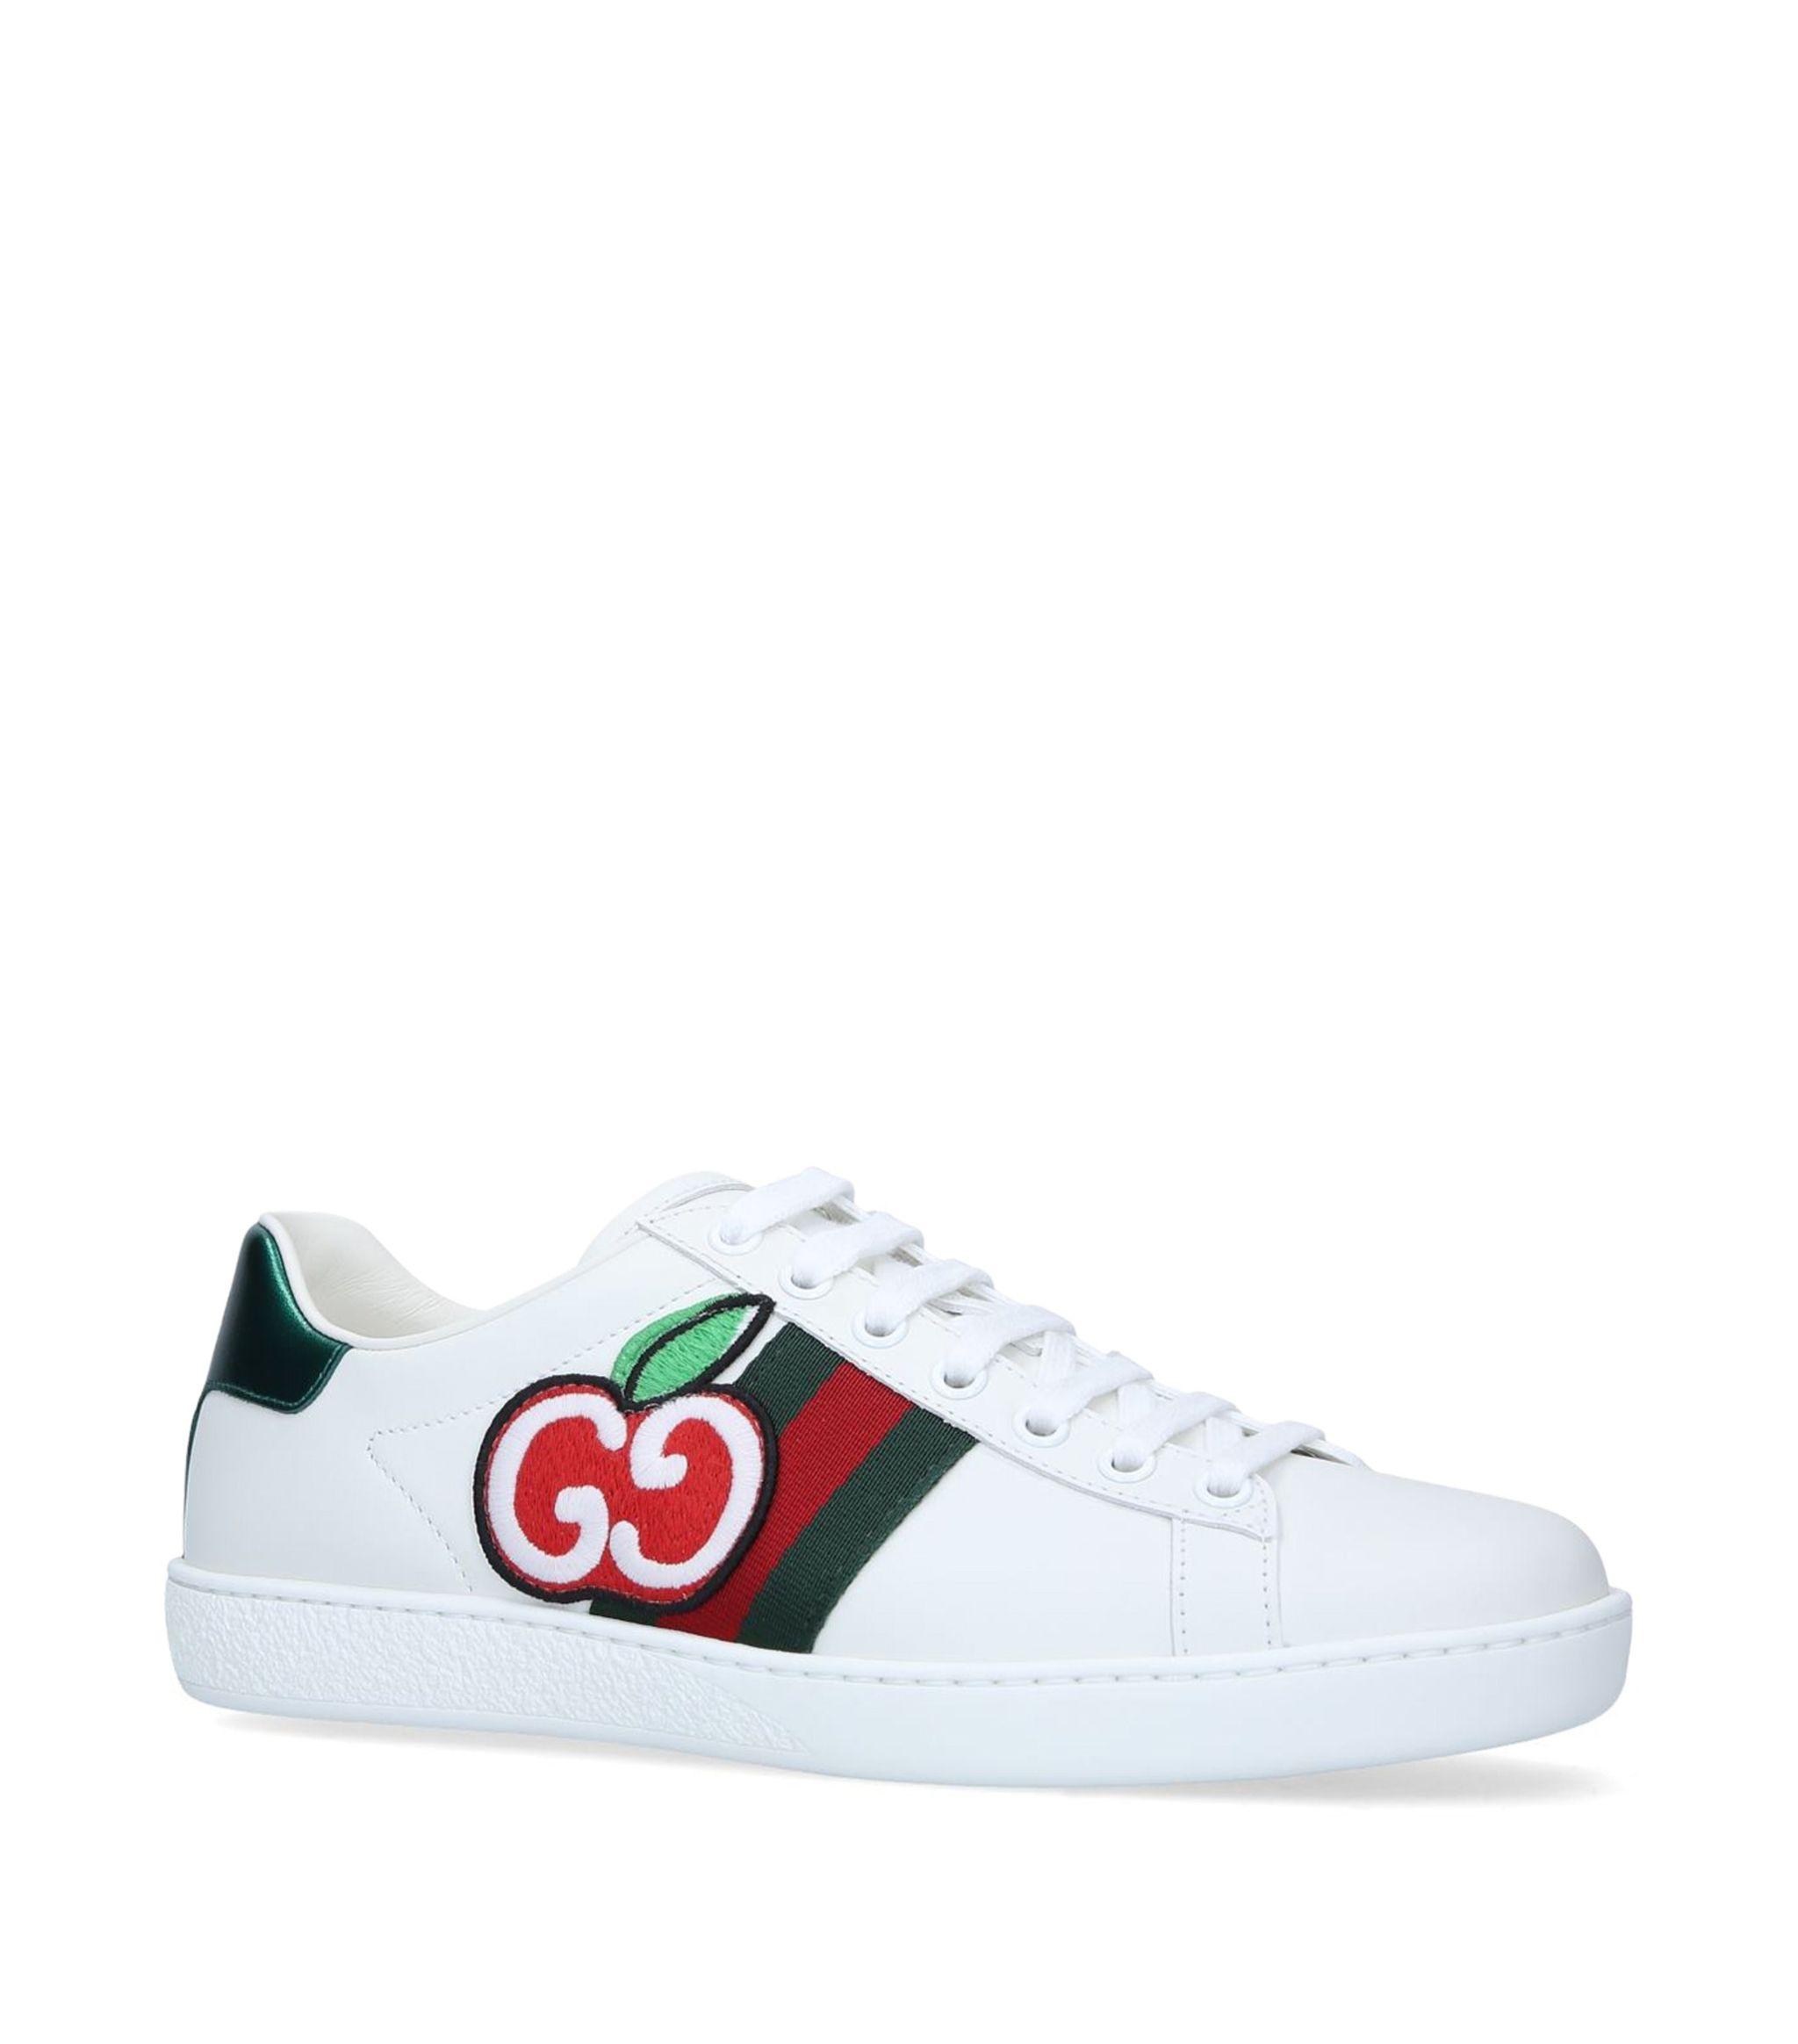 Gucci New Ace Apple-print Leather Trainers in White - Save 48% - Lyst